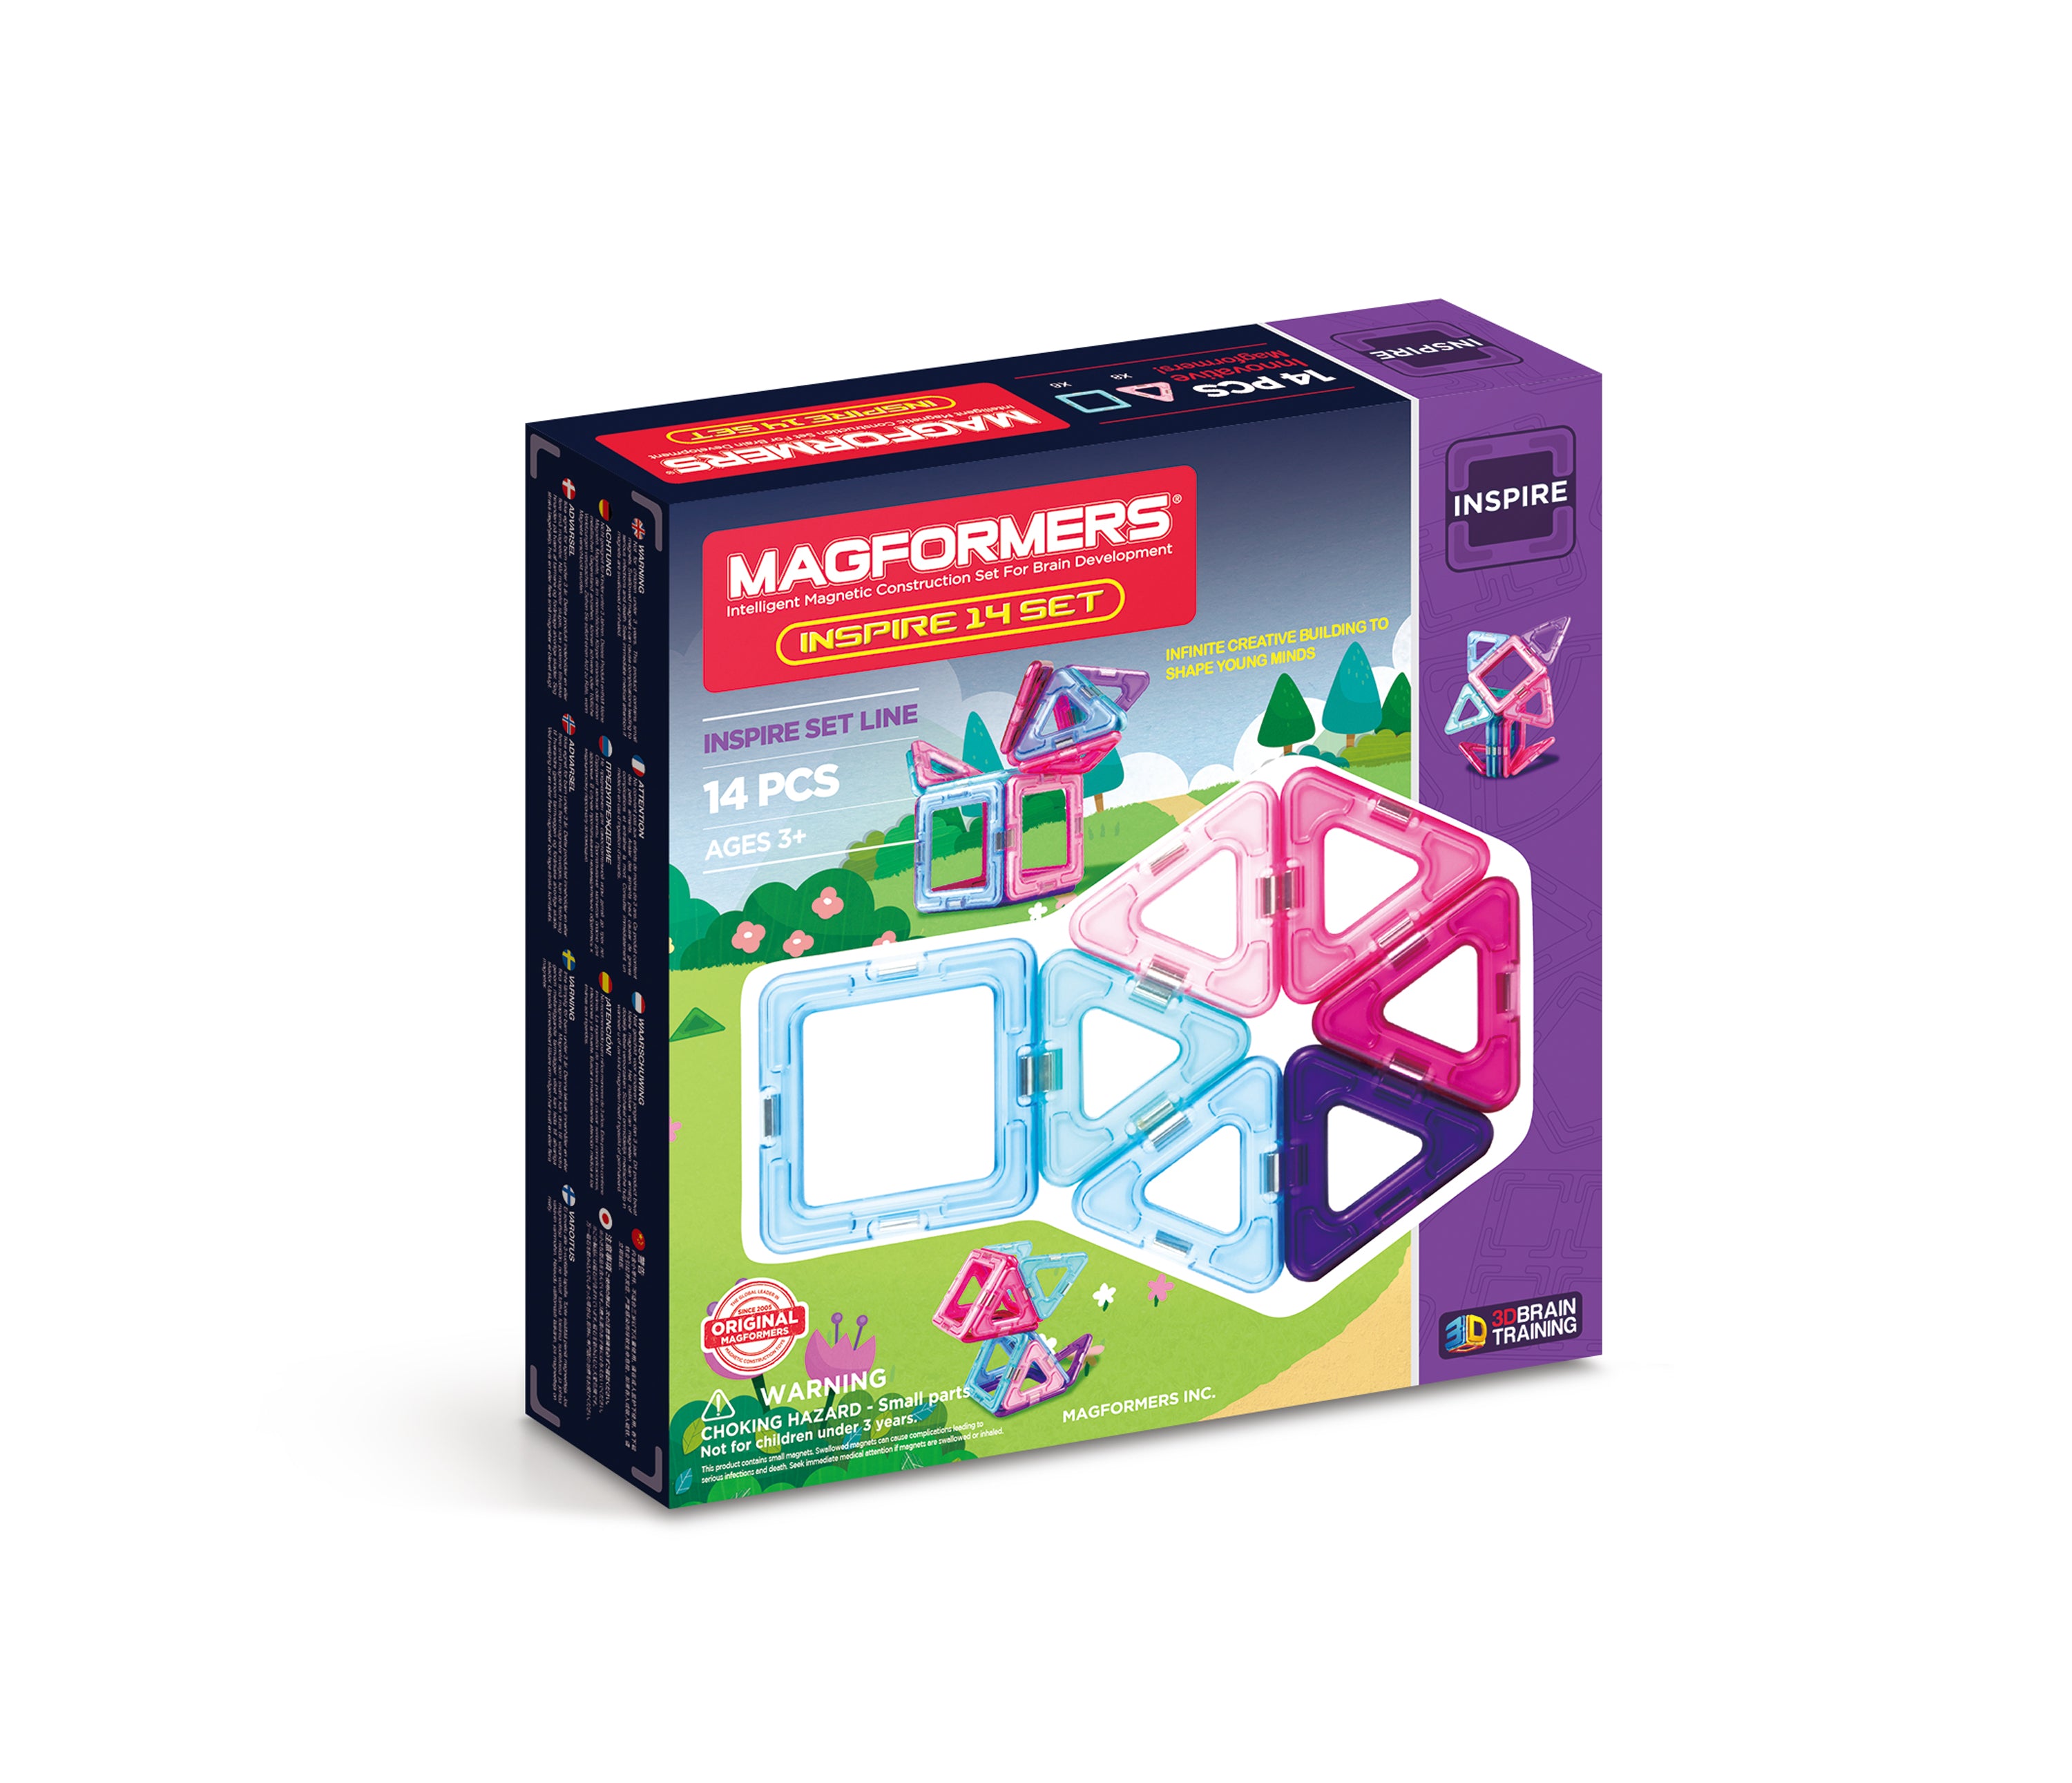 Magformers Inspire 14pc Magnetic Educational – Toy Magformers US Construction STEM